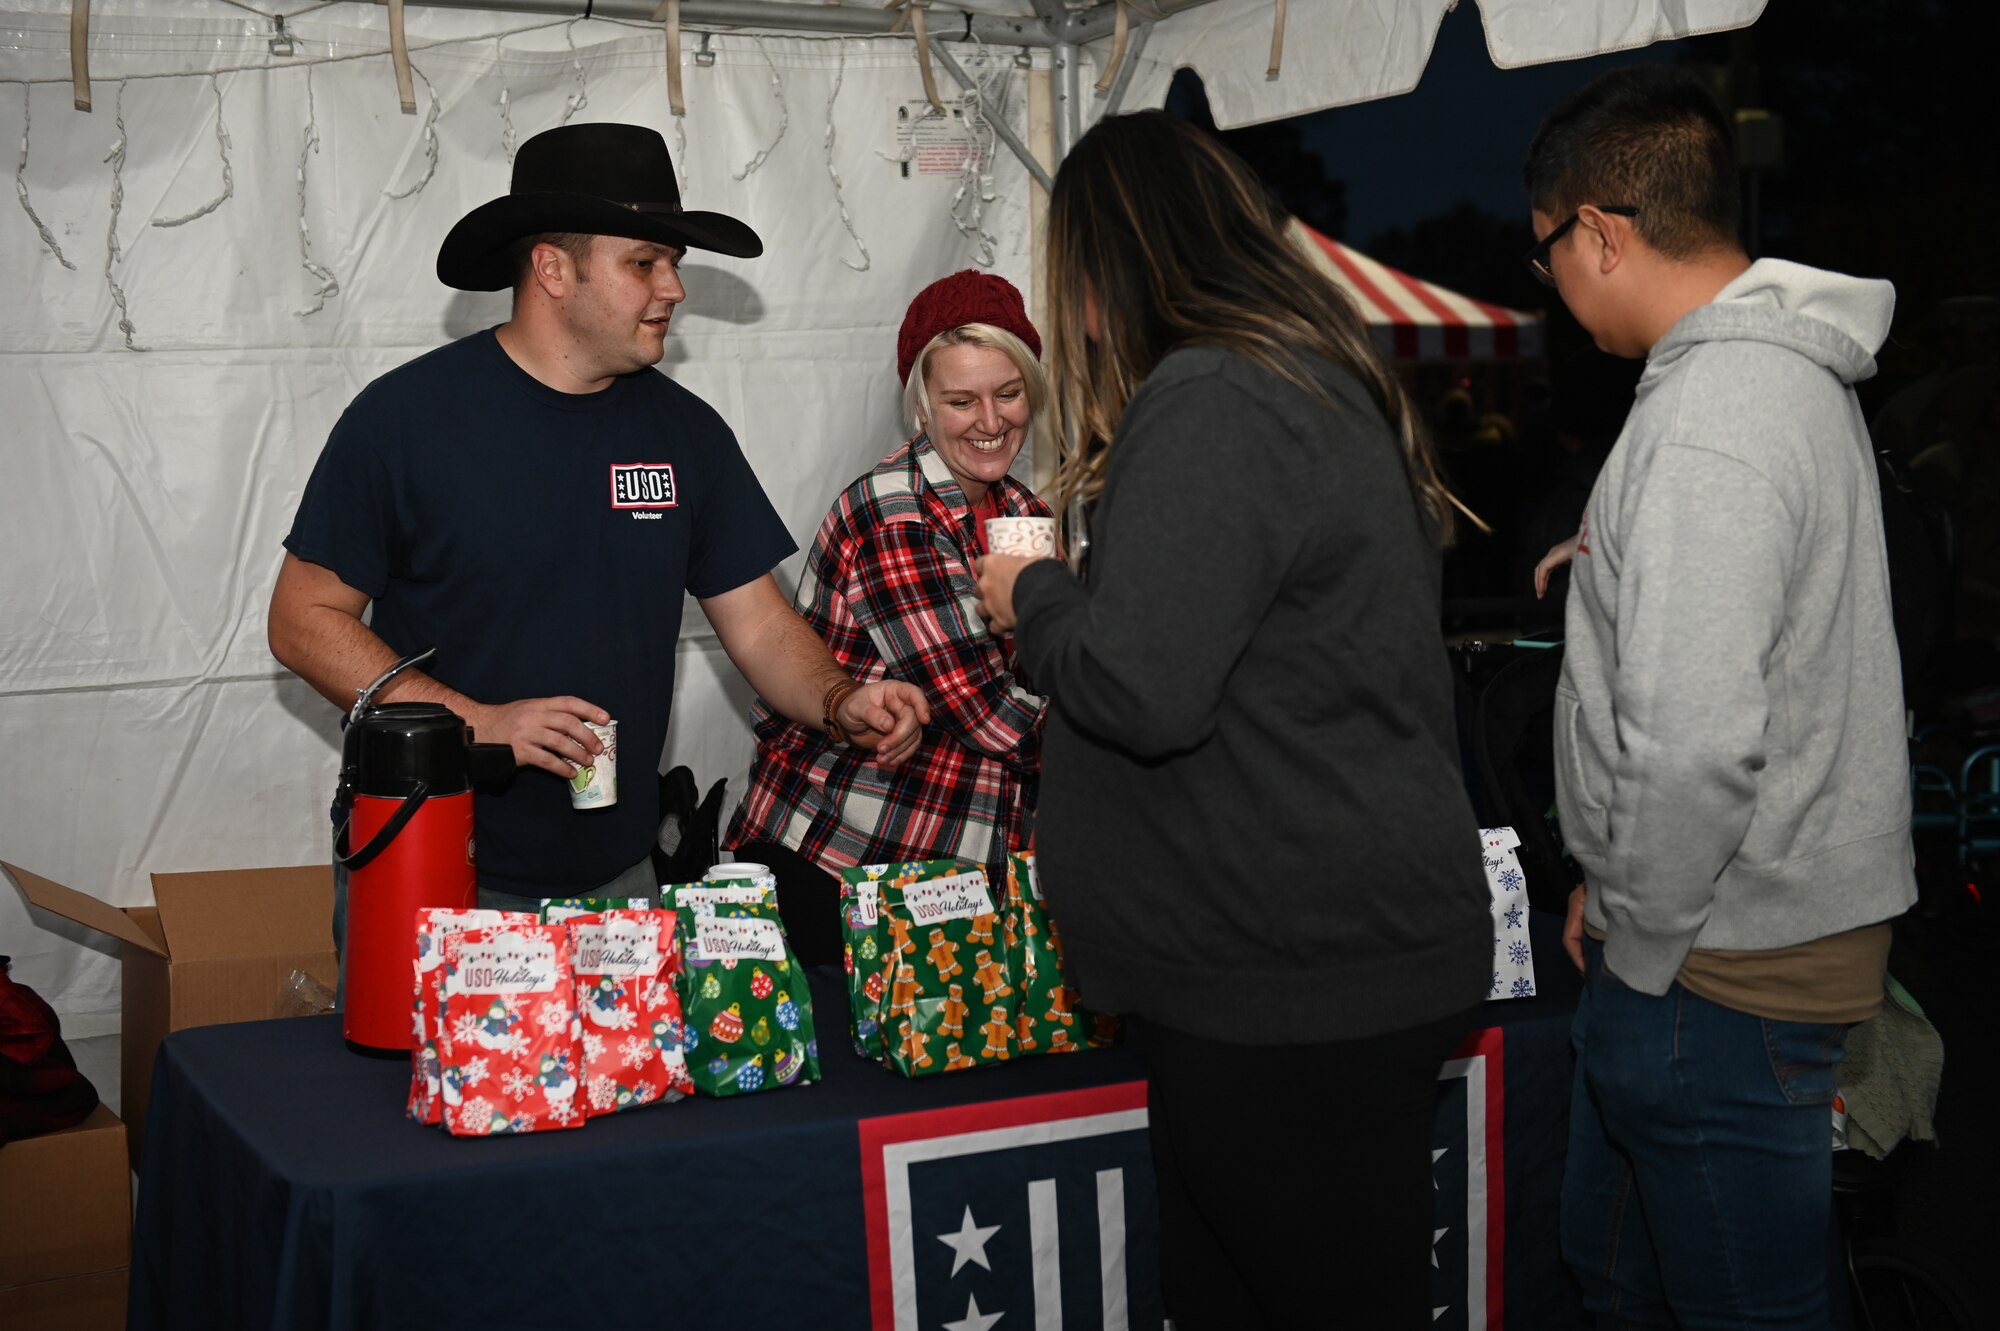 The USO volunteers hand out hot cocoa and goody bags to Airmen and their families during the Holiday Village and vendor fair at Seymour Johnson Air Force Base, North Carolina, Dec. 5, 2022. The festivities included entertainment for children, music performances, Santa and Mrs. Claus and vendor booths. (U.S. Air Force photo by Airman 1st Class Rebecca Sirimarco-Lang)